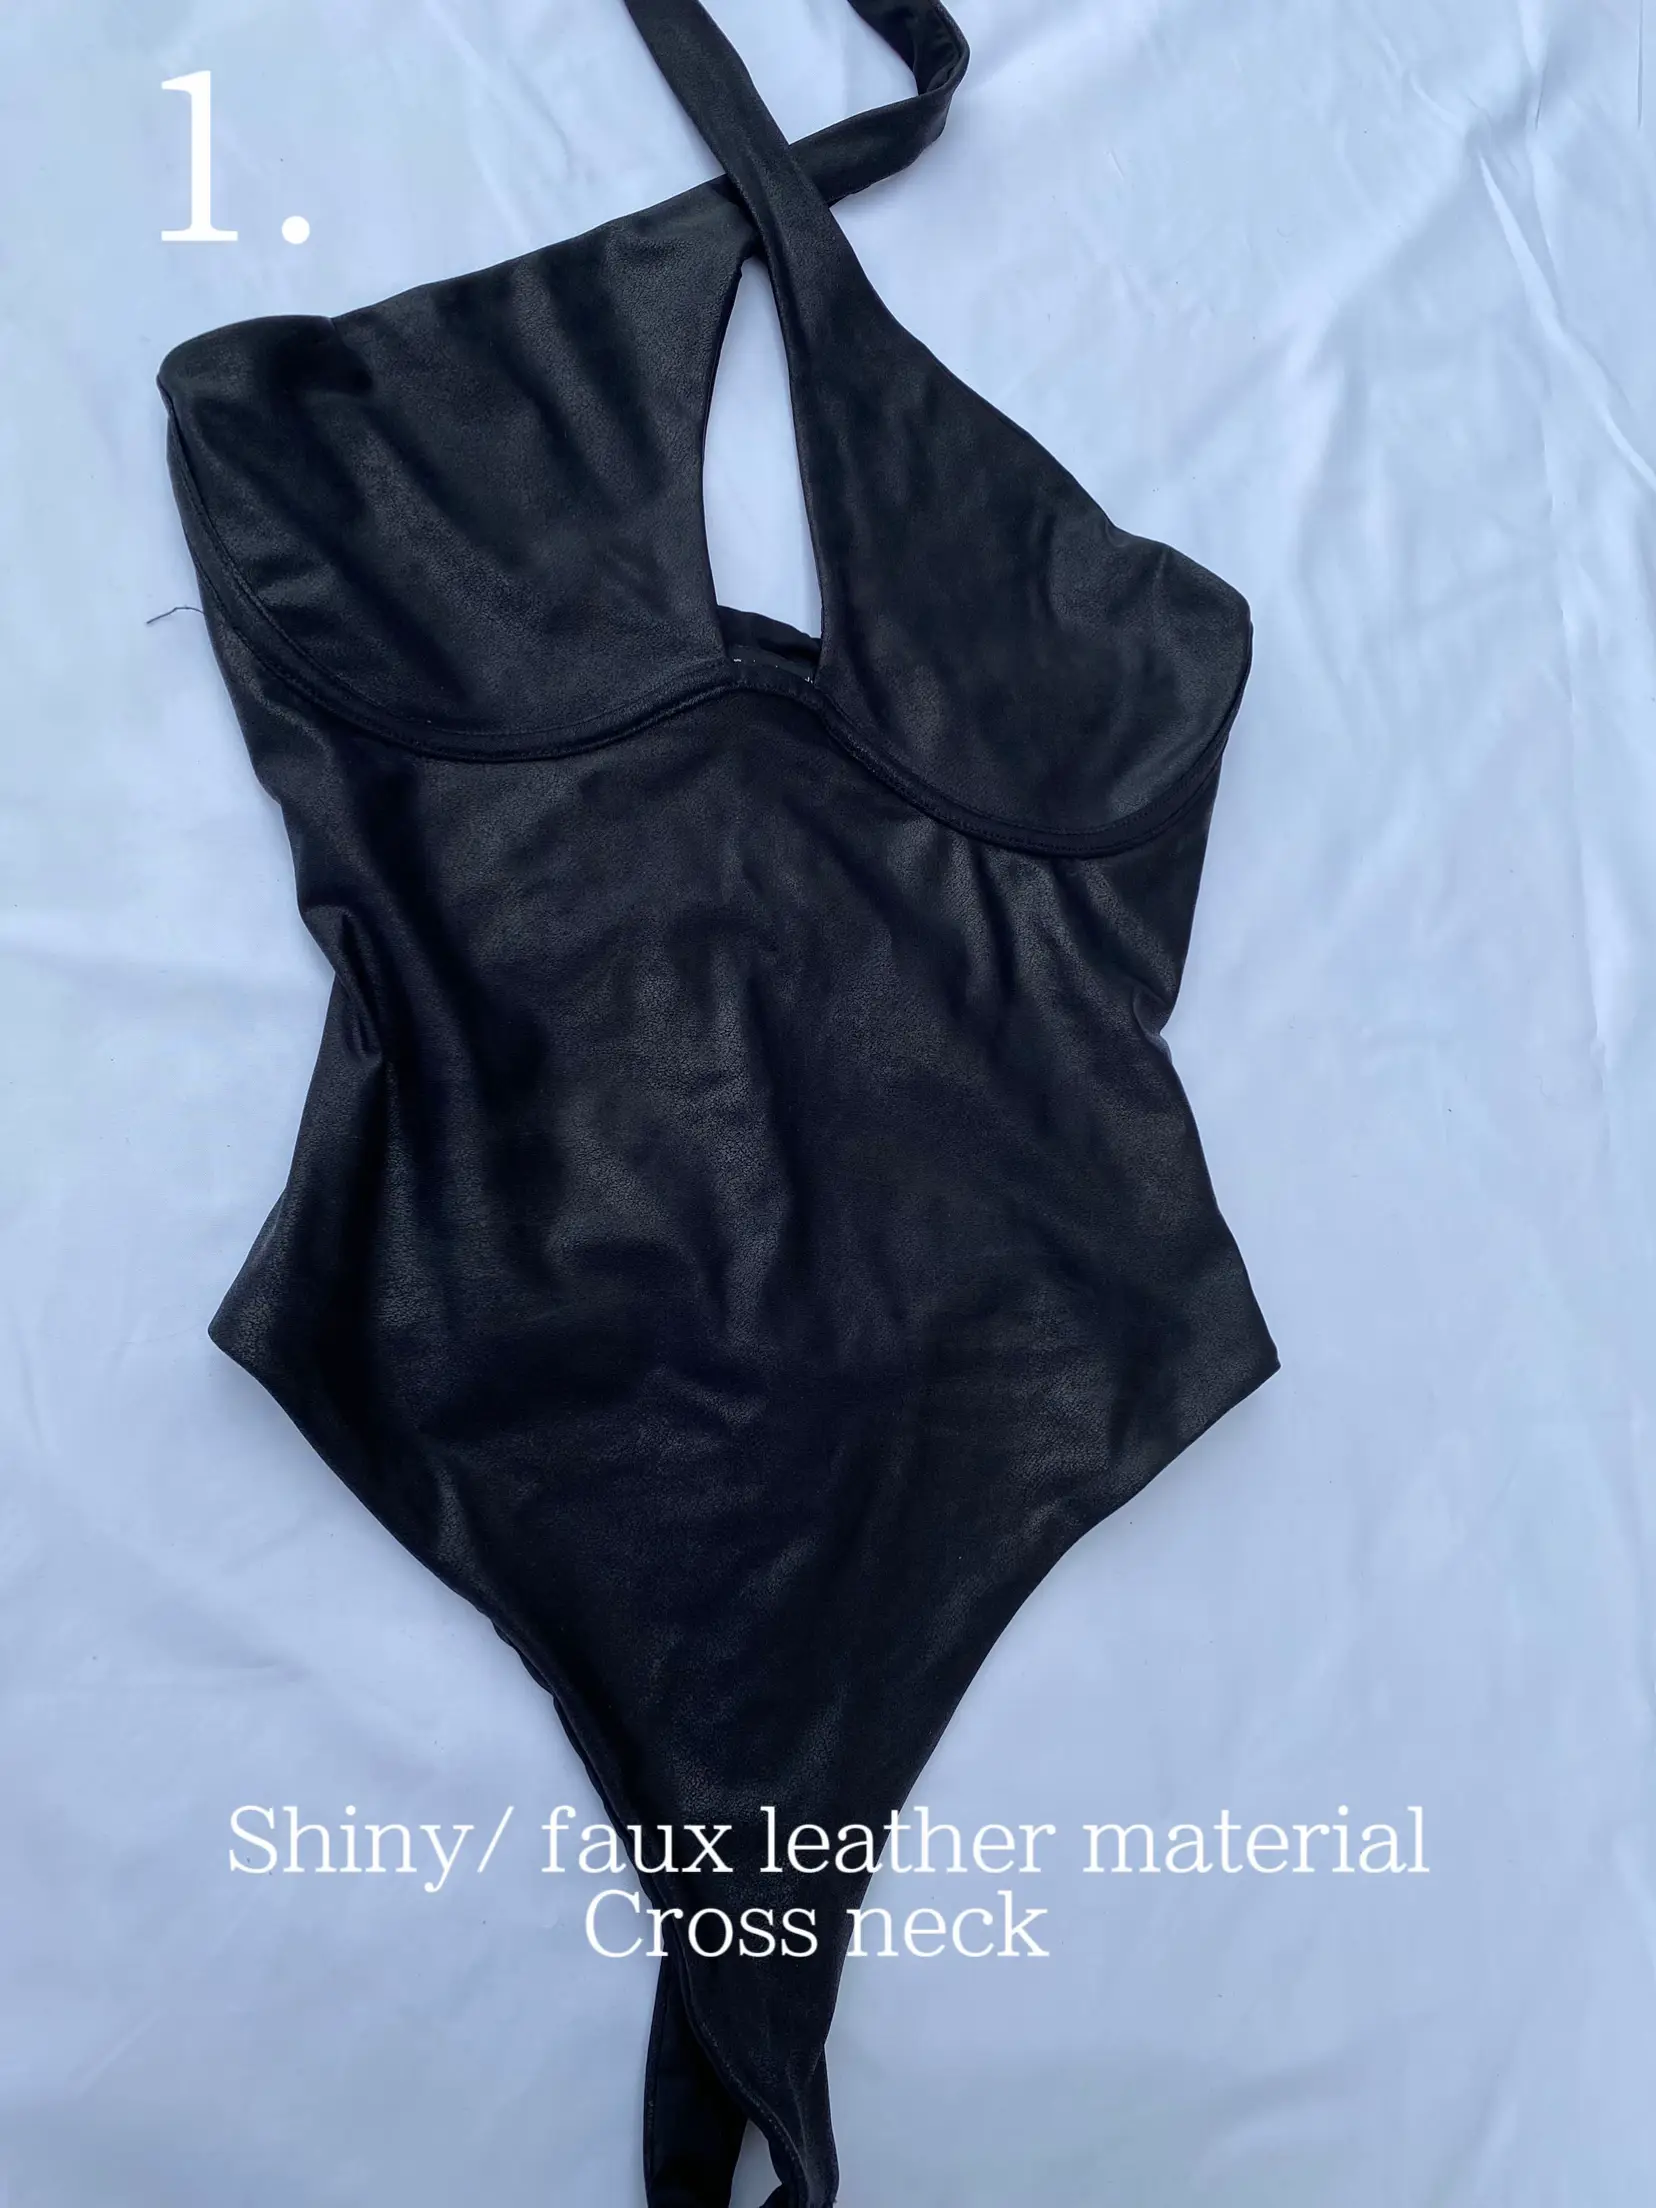 SKIMS DUPE [BODYSUITS EDITION], Gallery posted by Pamelamrls